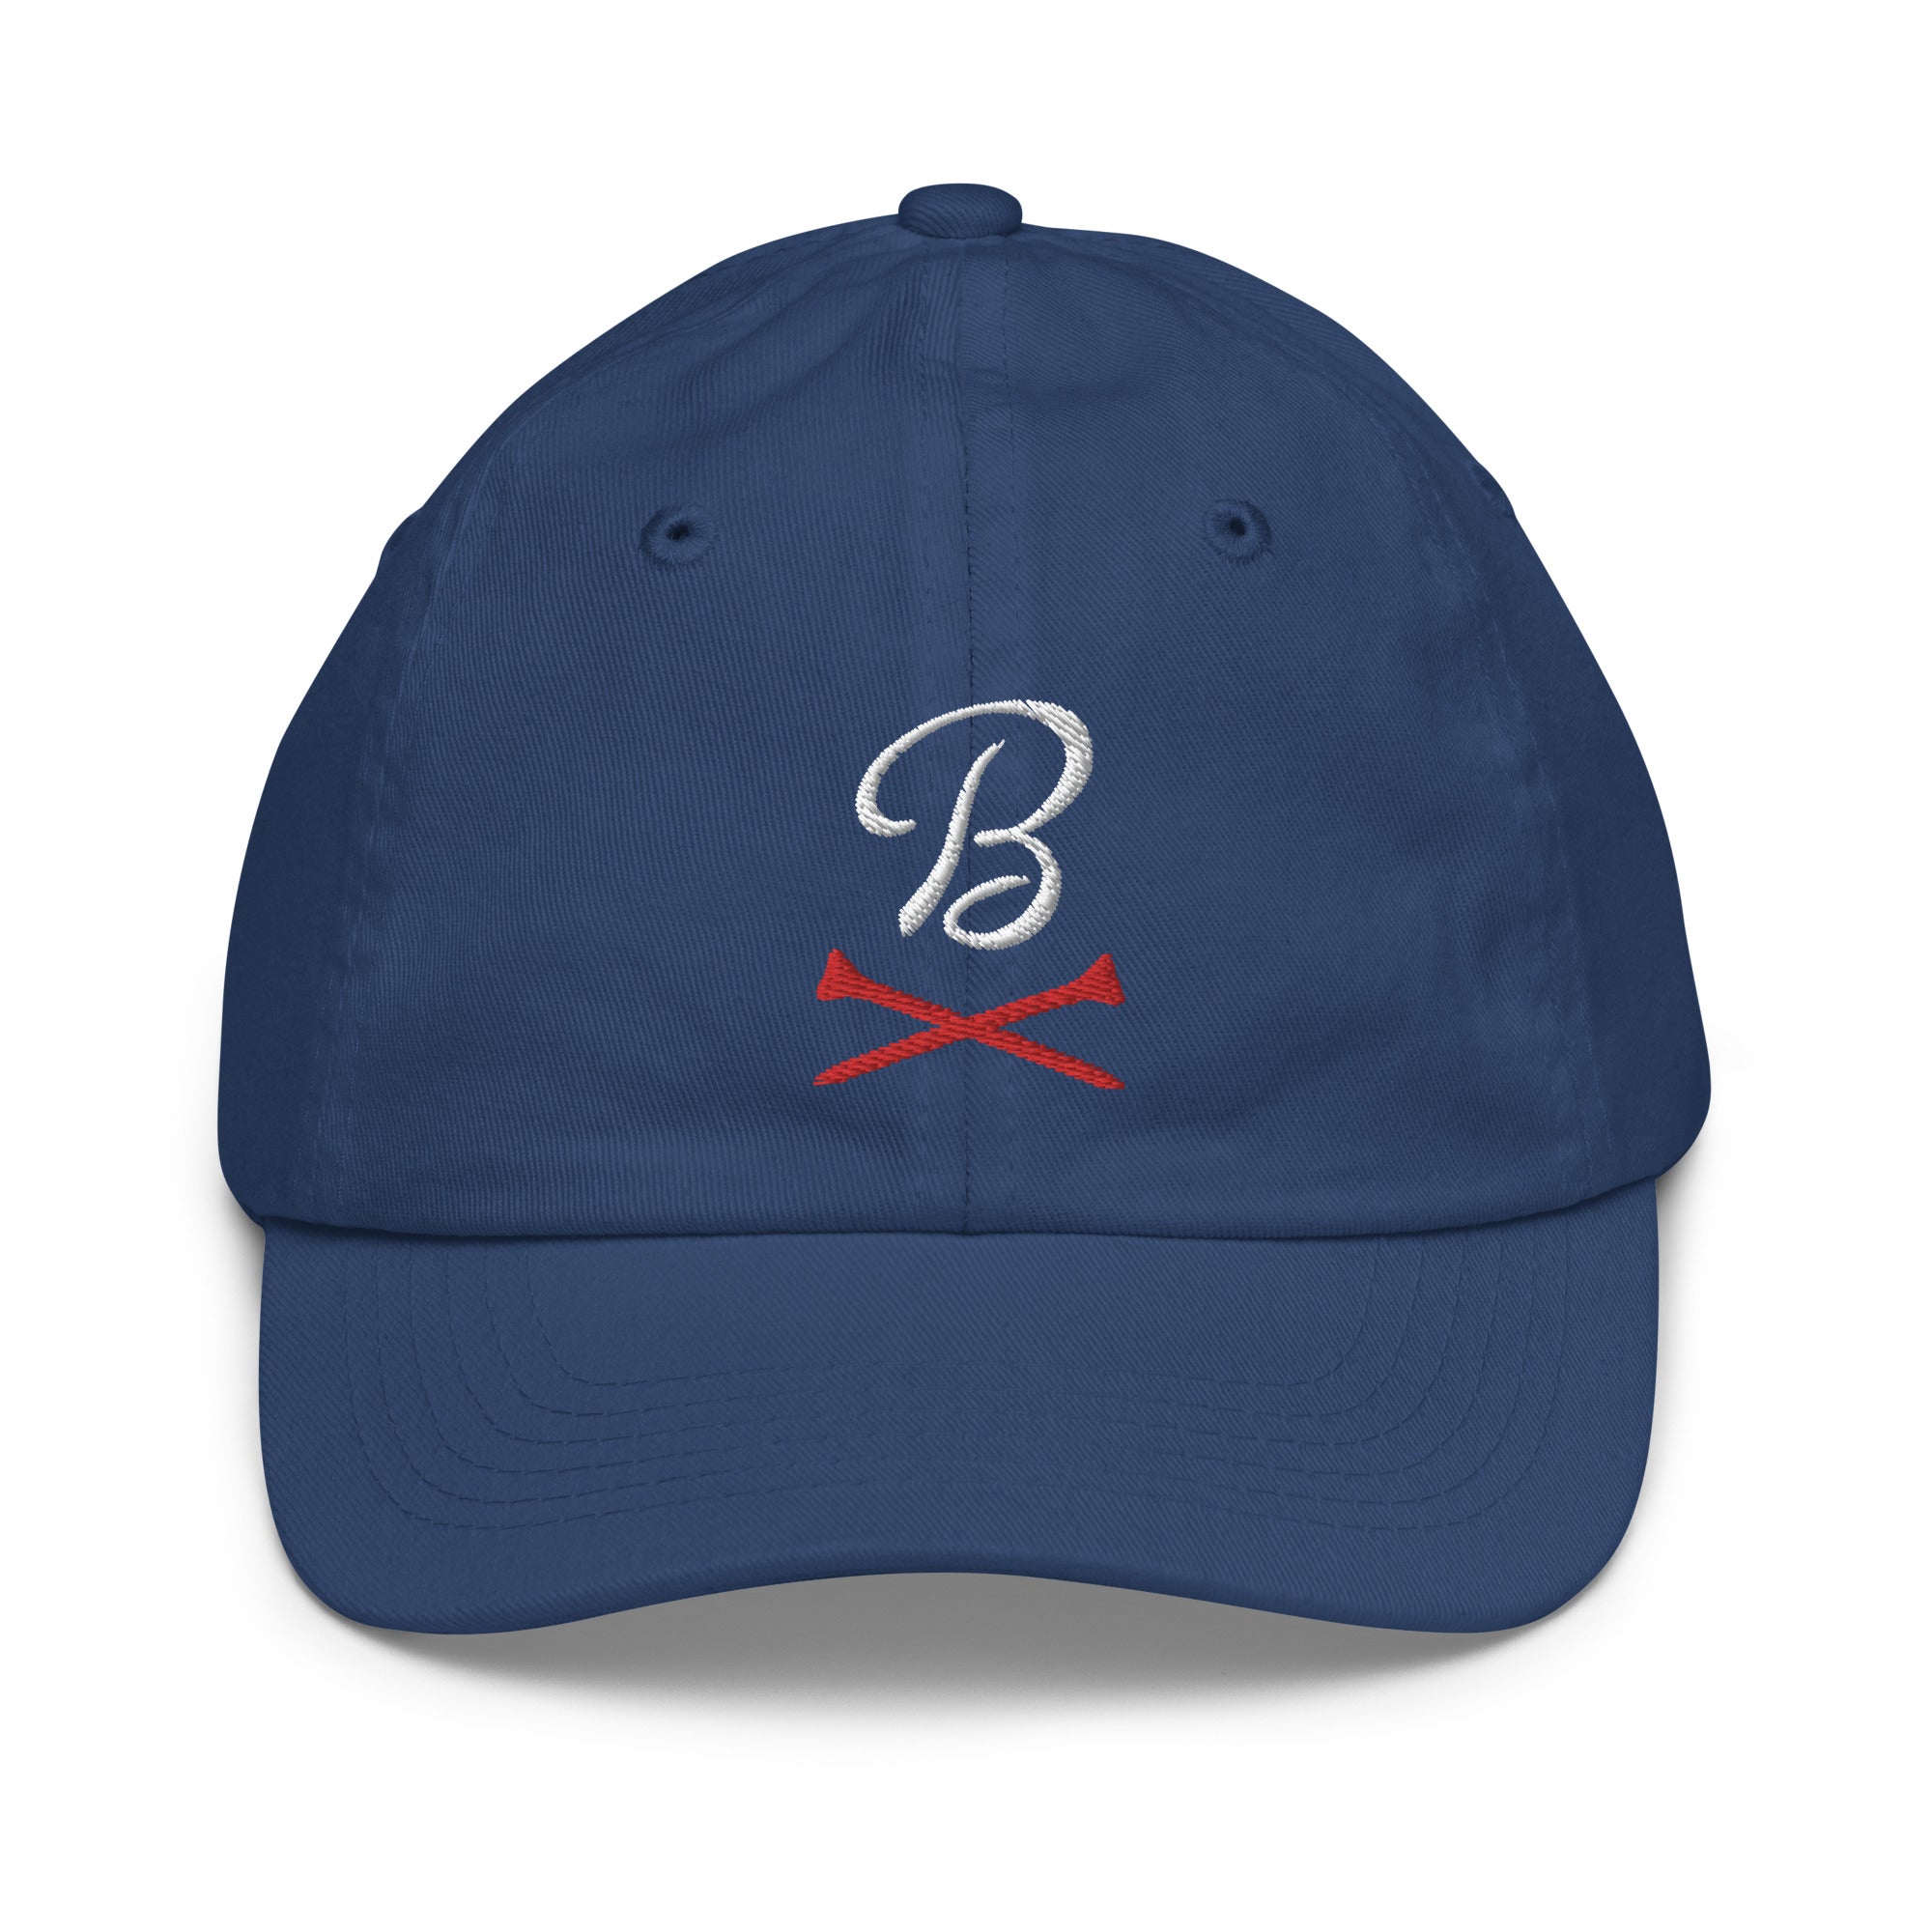 Barstool Golf Youth Hat-Kids Apparel-Fore Play-Blue-Barstool Sports